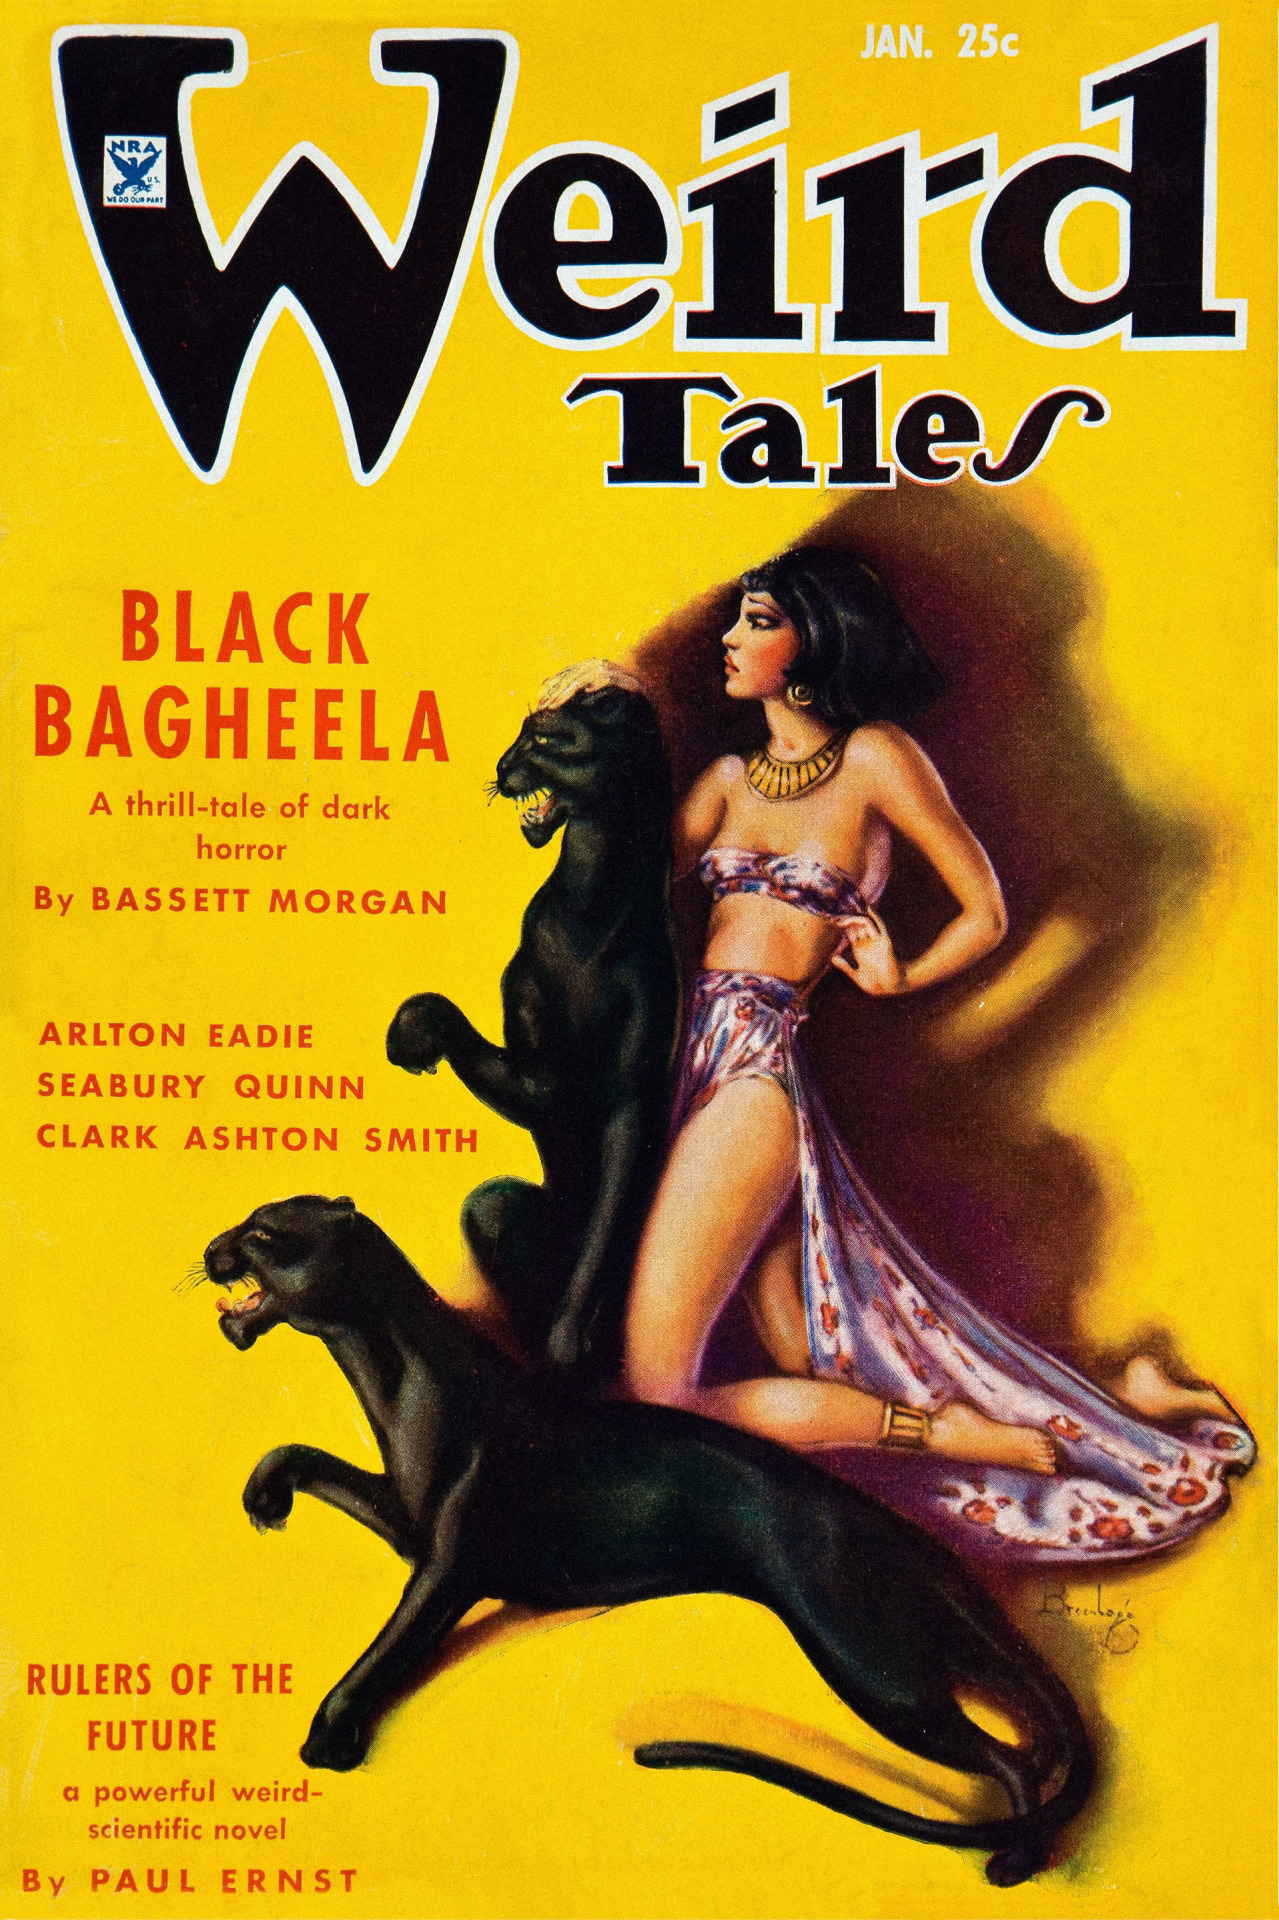 scificovers:
“ Weird Tales vol 25 no 1, January 1935. Cover by M. Brundage illustrating “Black Bagheela” by Bassett Morgan.
”